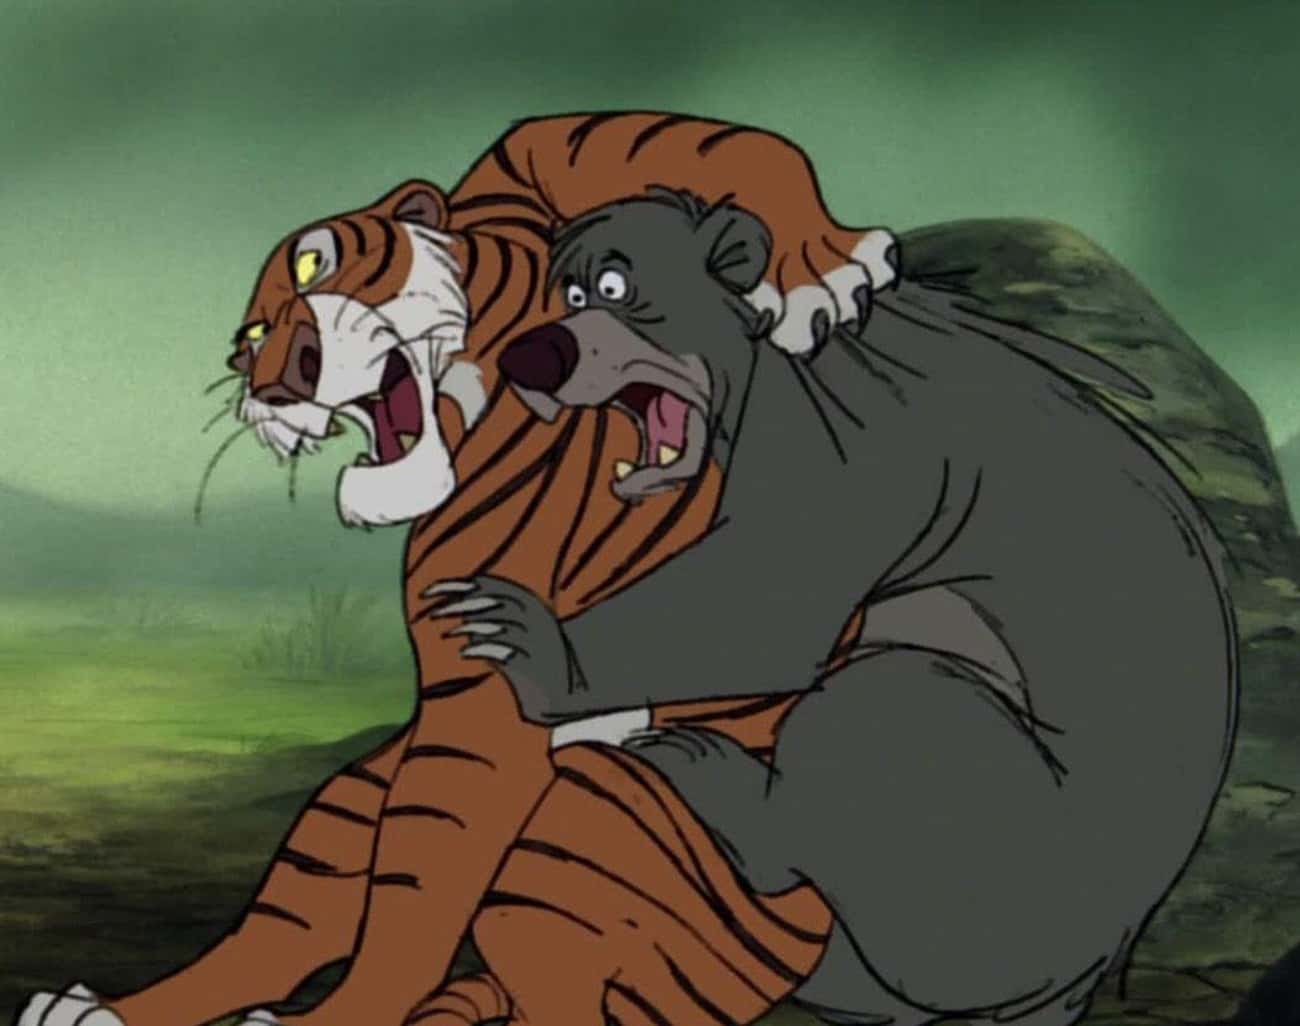 12 Accurate Scientific Details That Disney Movies Got Right - Sloth Bears And Bengal Tigers Are Native To India, And Might Indeed Fight Each Other, Like In ‘The Jungle Book'